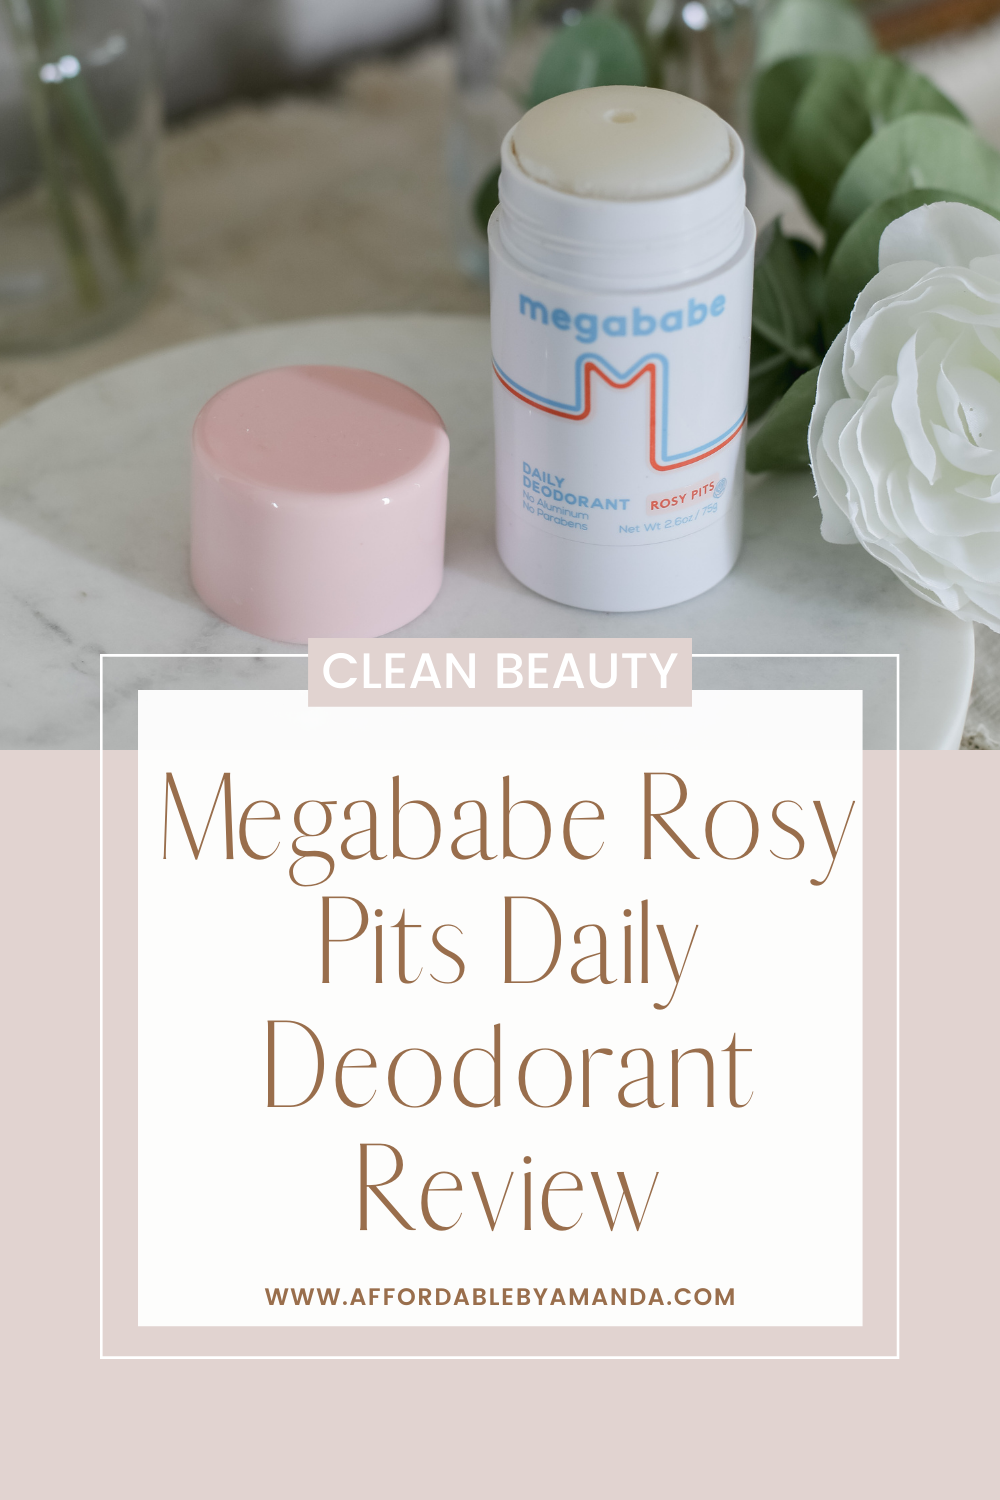 Megababe Rosy Pits Daily Deodorant Review - Affordable by Amanda